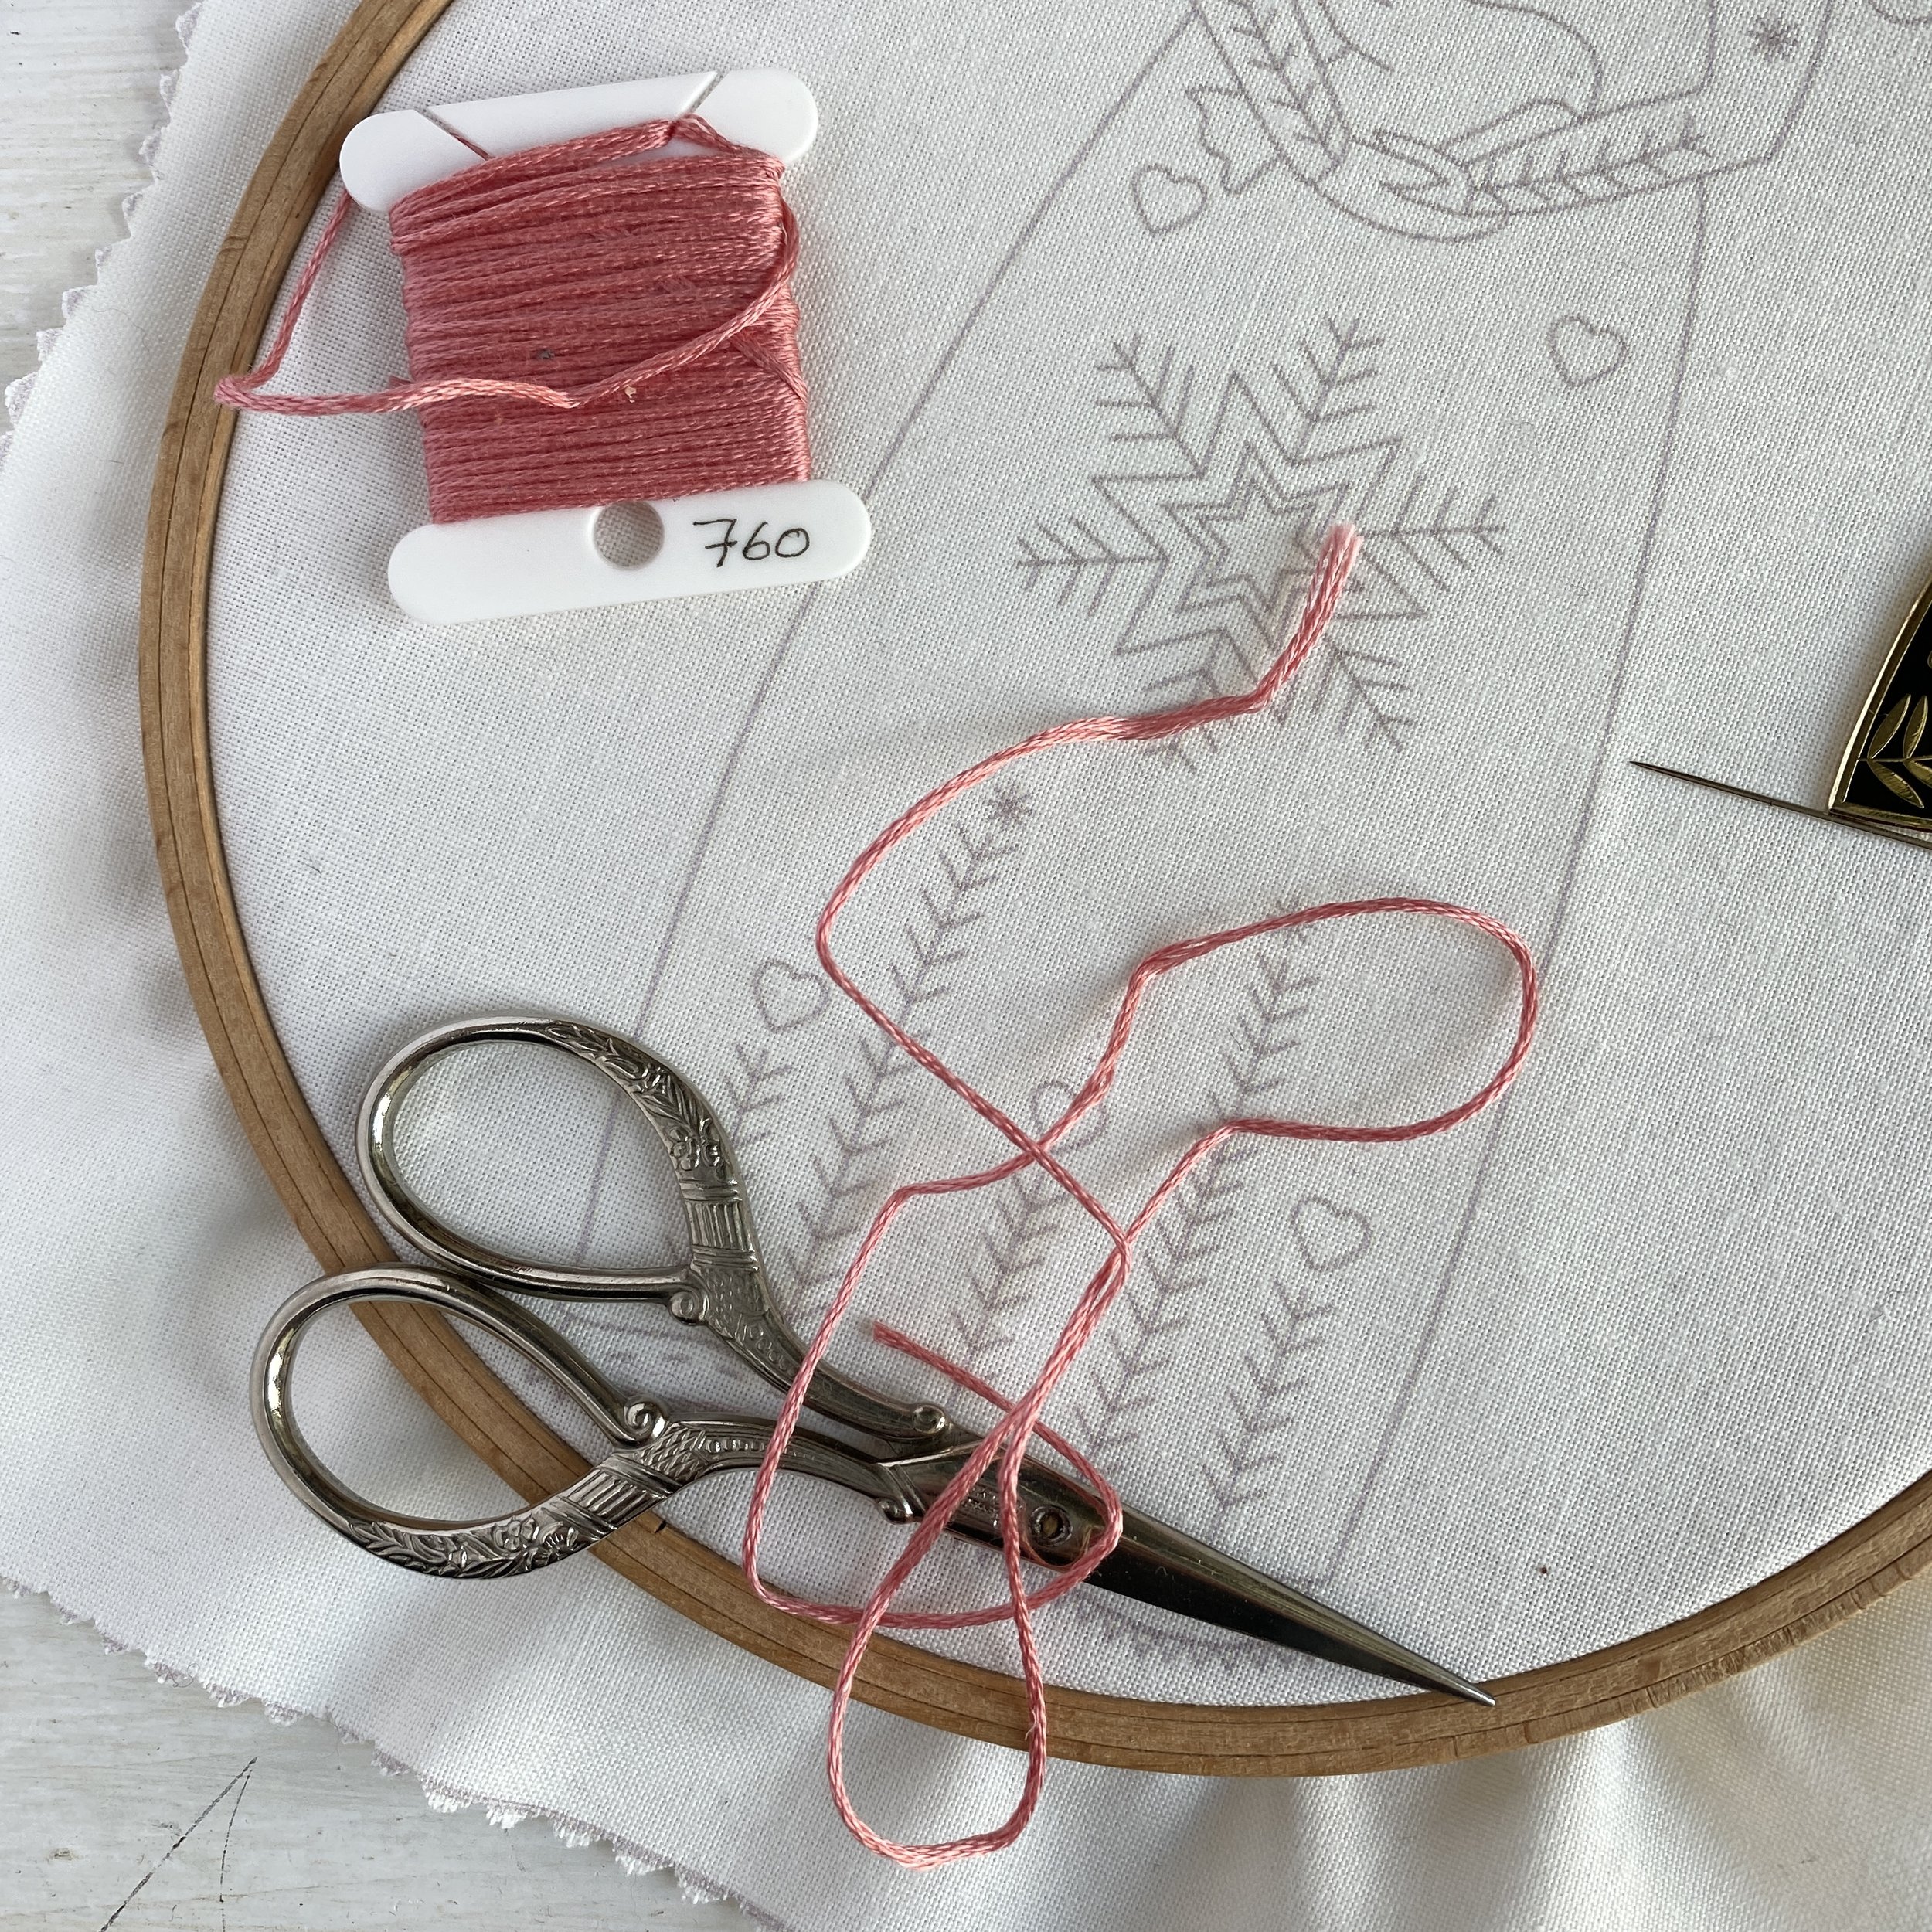 EMBROIDERY 101 // How to embroider for beginners - What you need